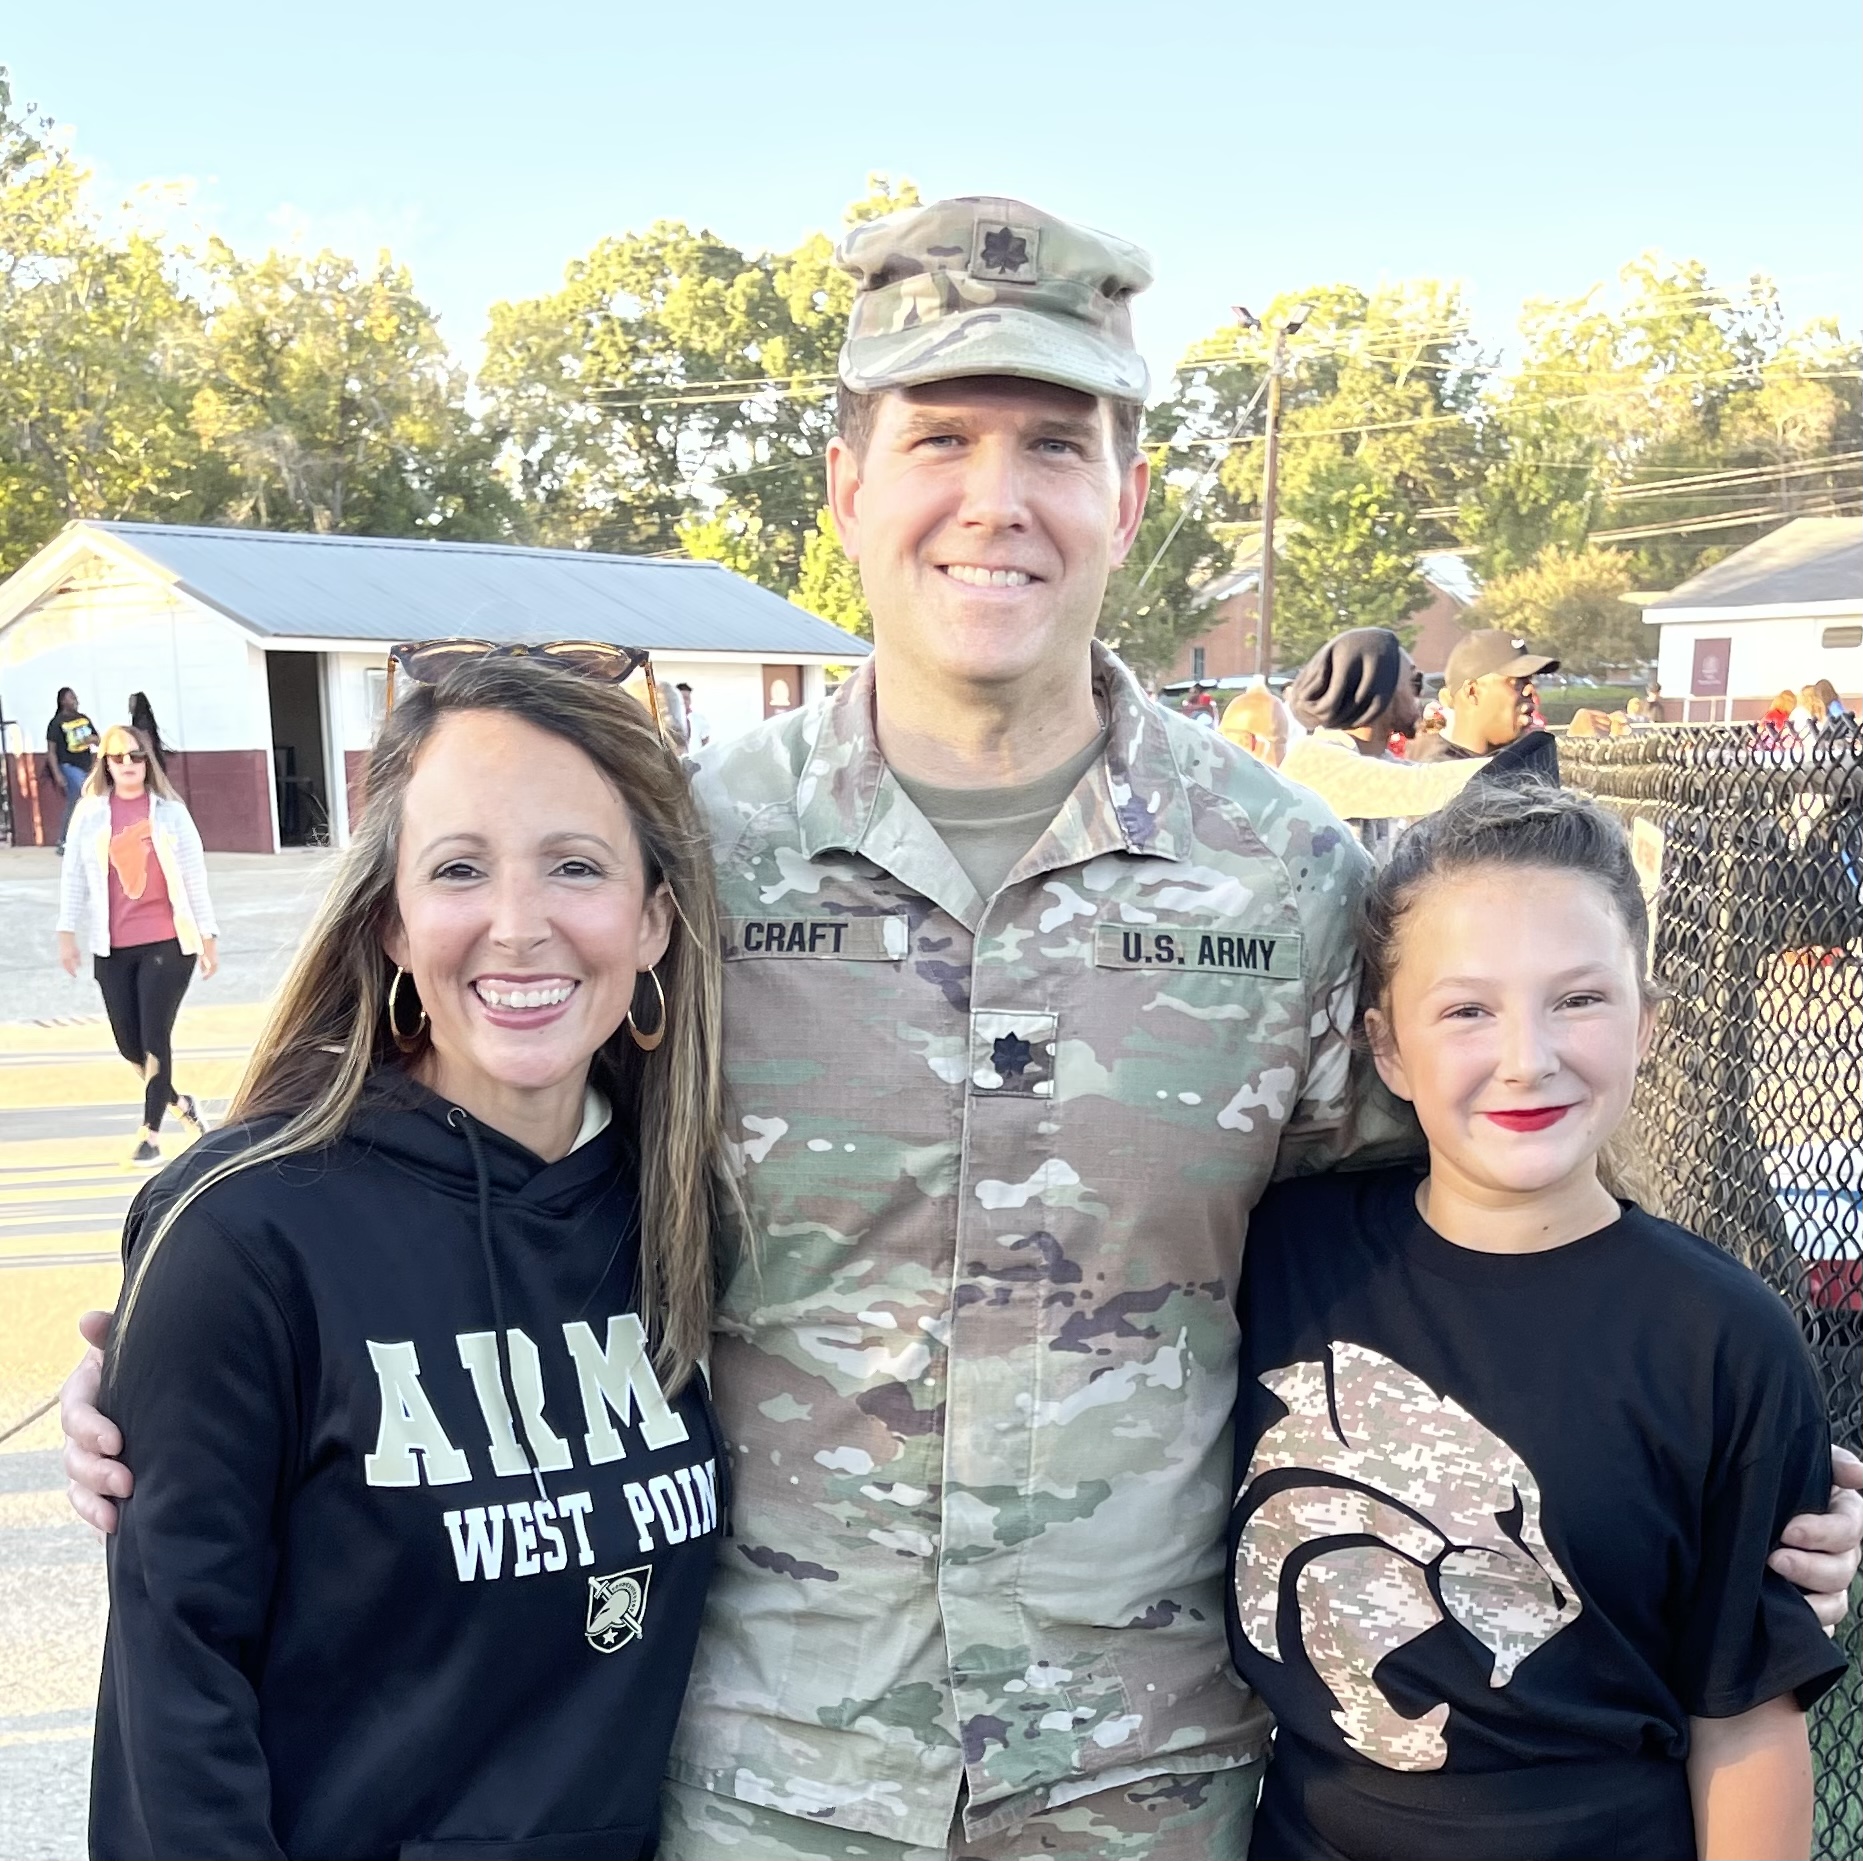 Mrs. Craft standing to the left of her husband. Her husband is wearing military camo with their daughter,  standing to his right